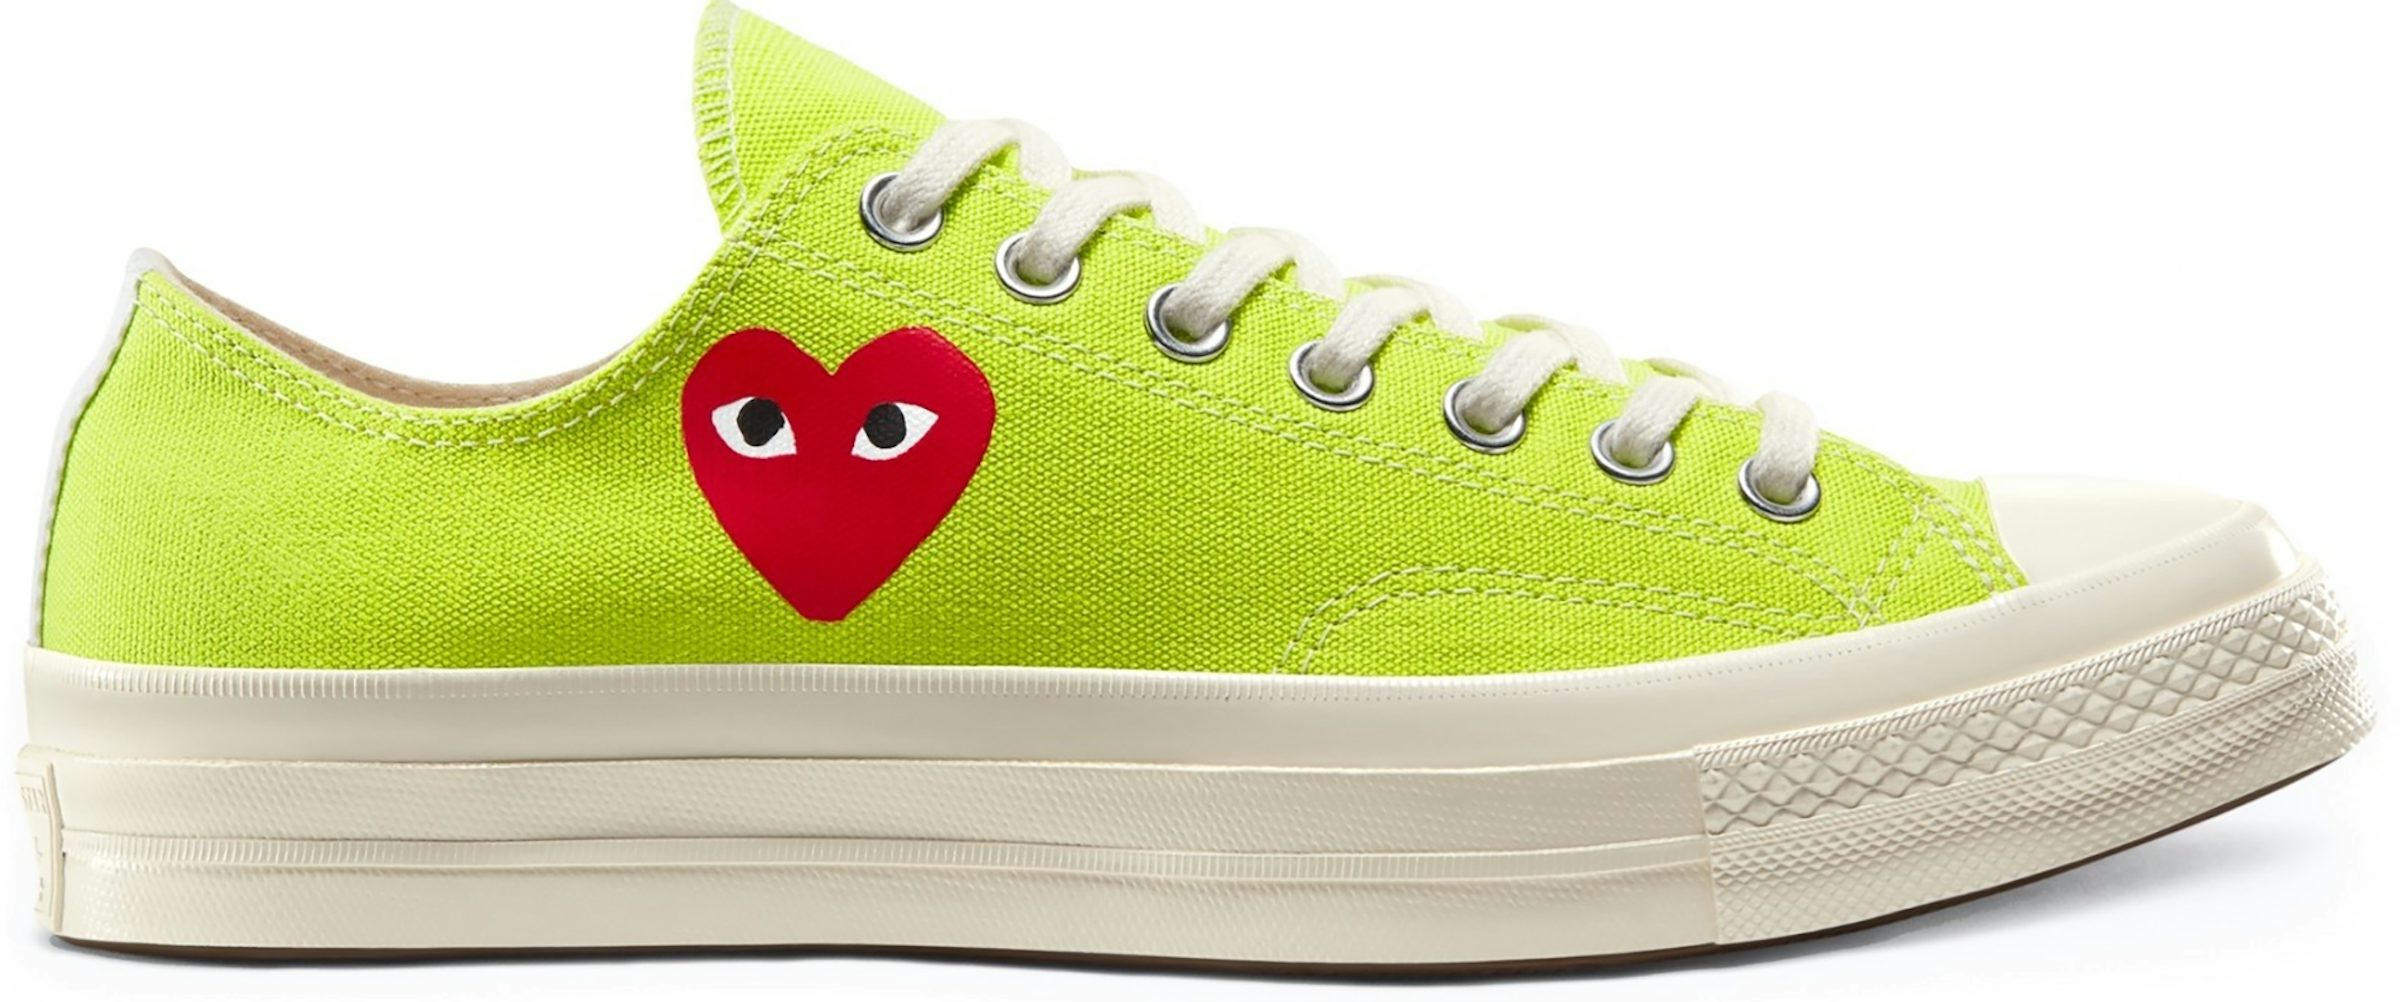 Converse Chuck Taylor All-Star 70 Ox Comme Play Bright Green Men's - 168302C - US